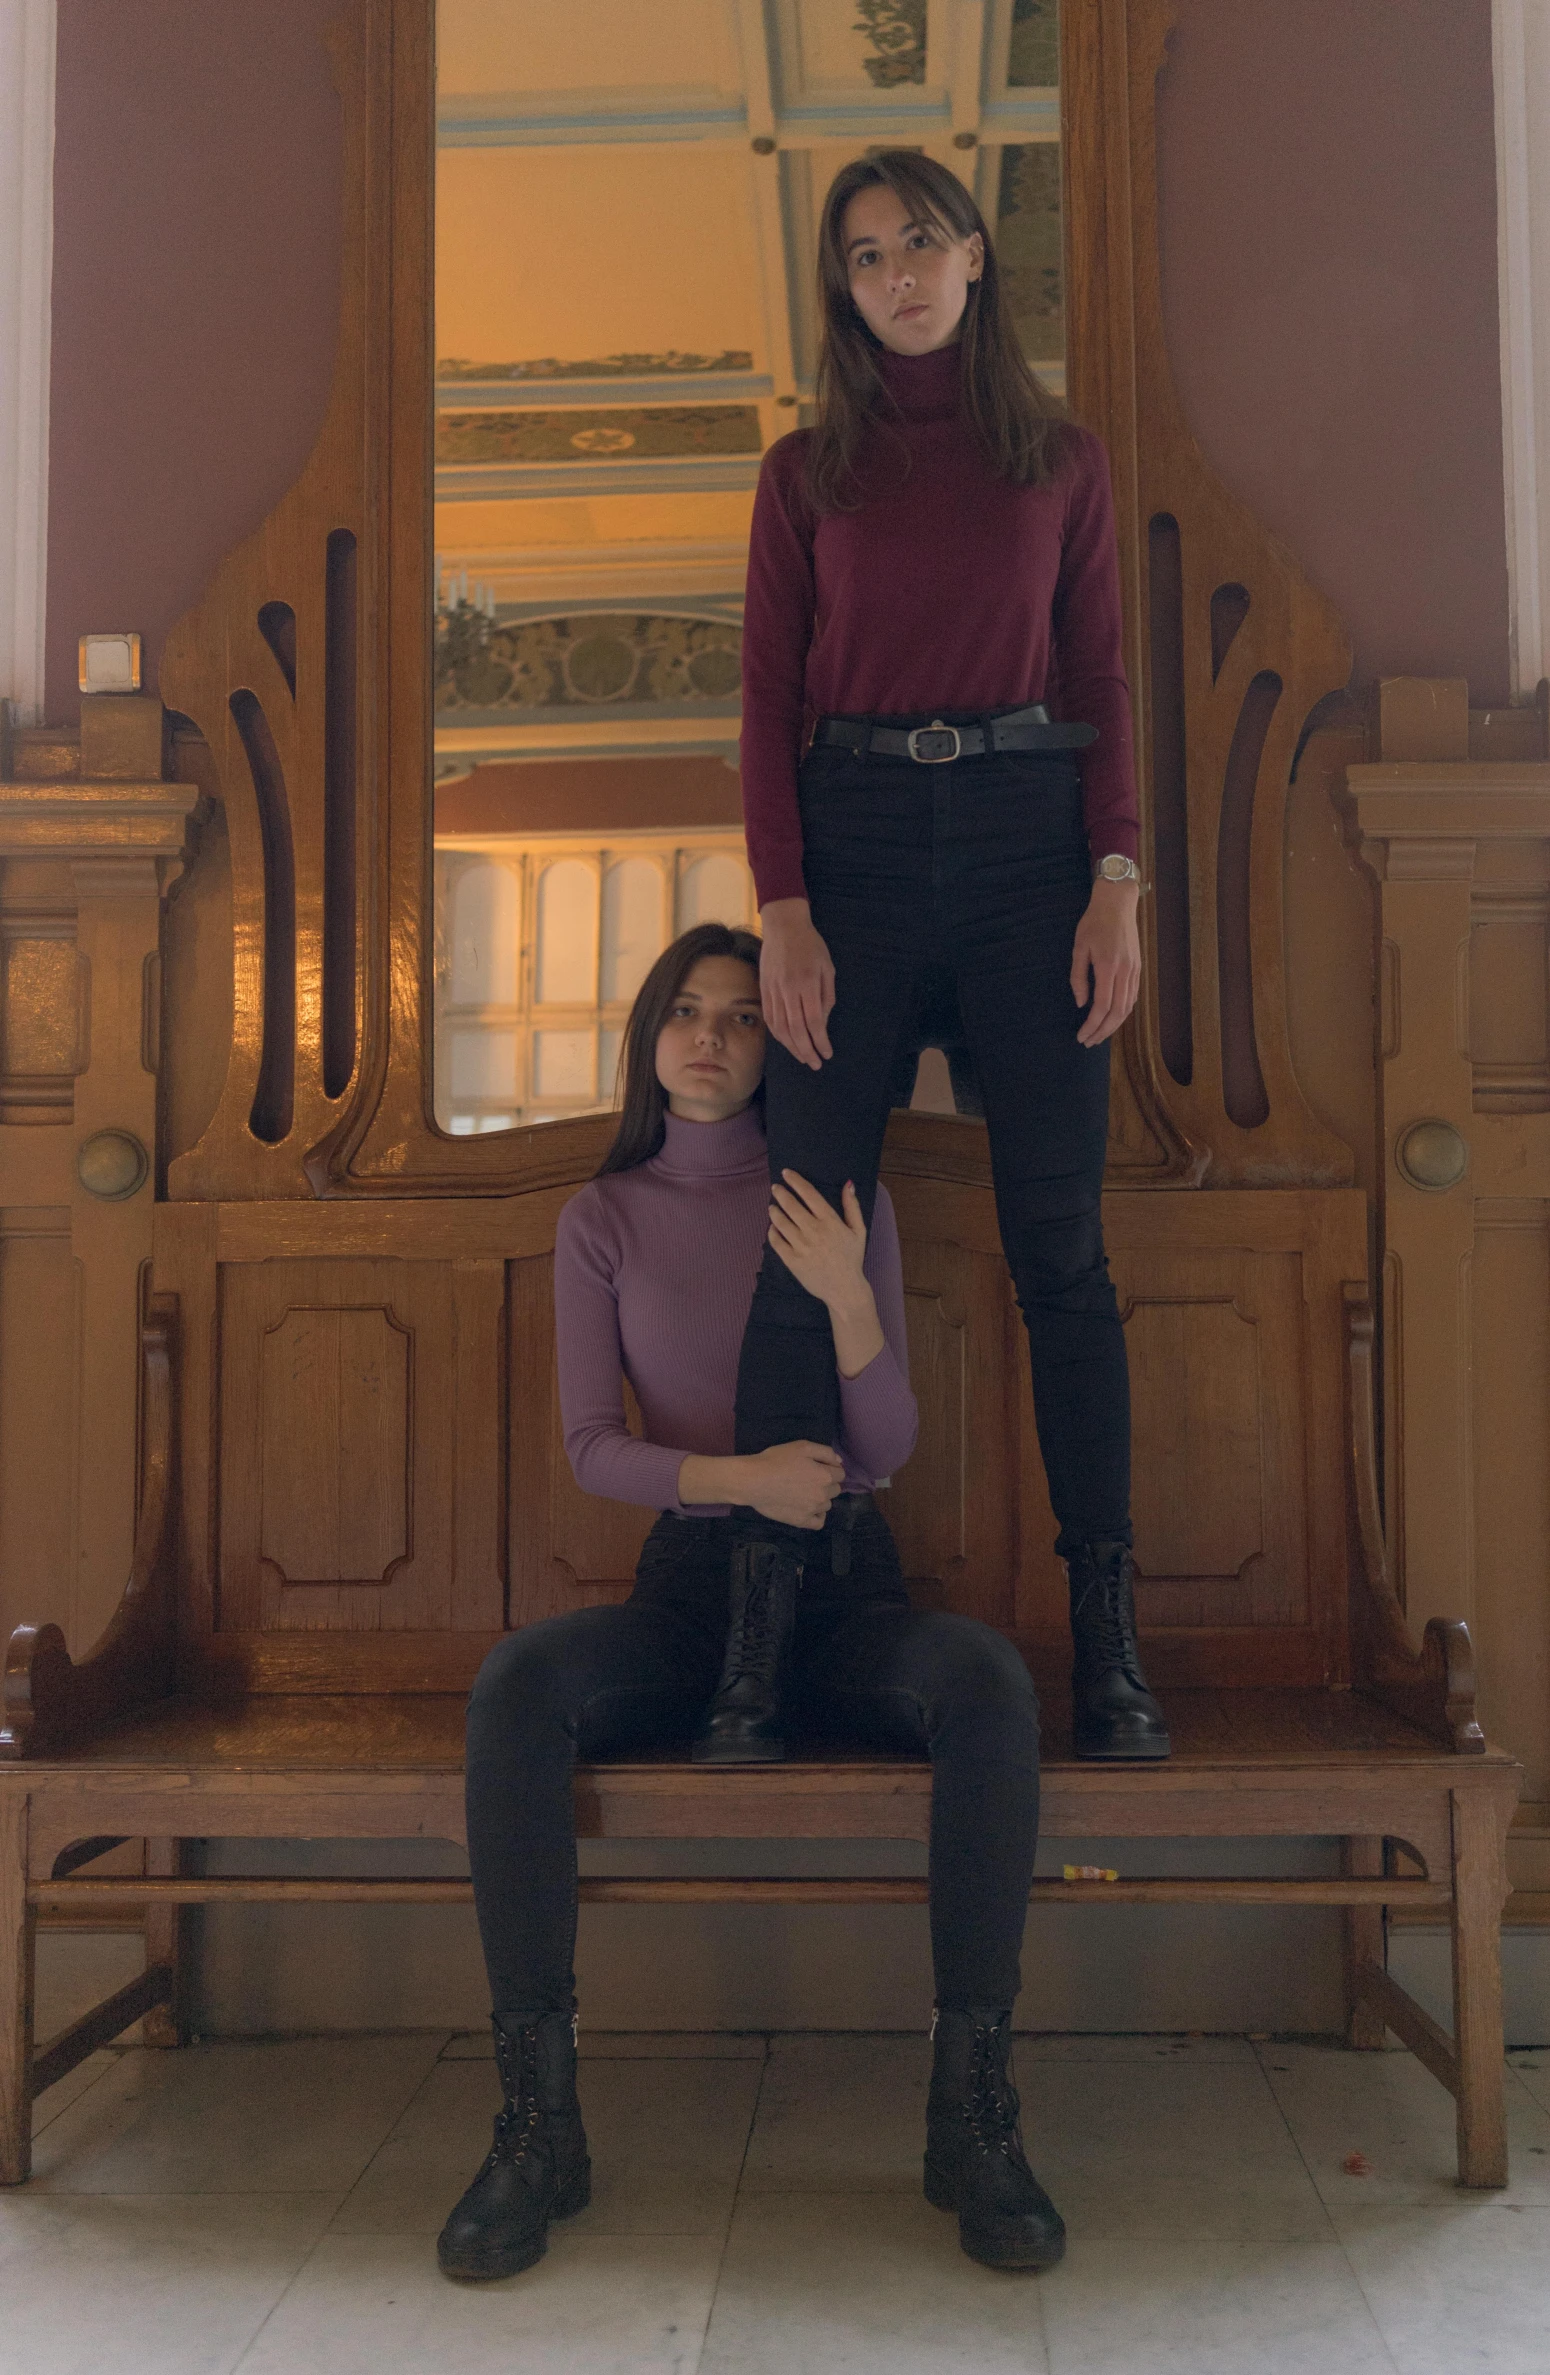 two women sitting on a bench in front of a mirror, an album cover, inspired by Vanessa Beecroft, pexels contest winner, renaissance, sitting on a grand staircase, standing on two legs, ( ( theatrical ) ), american gothic interior